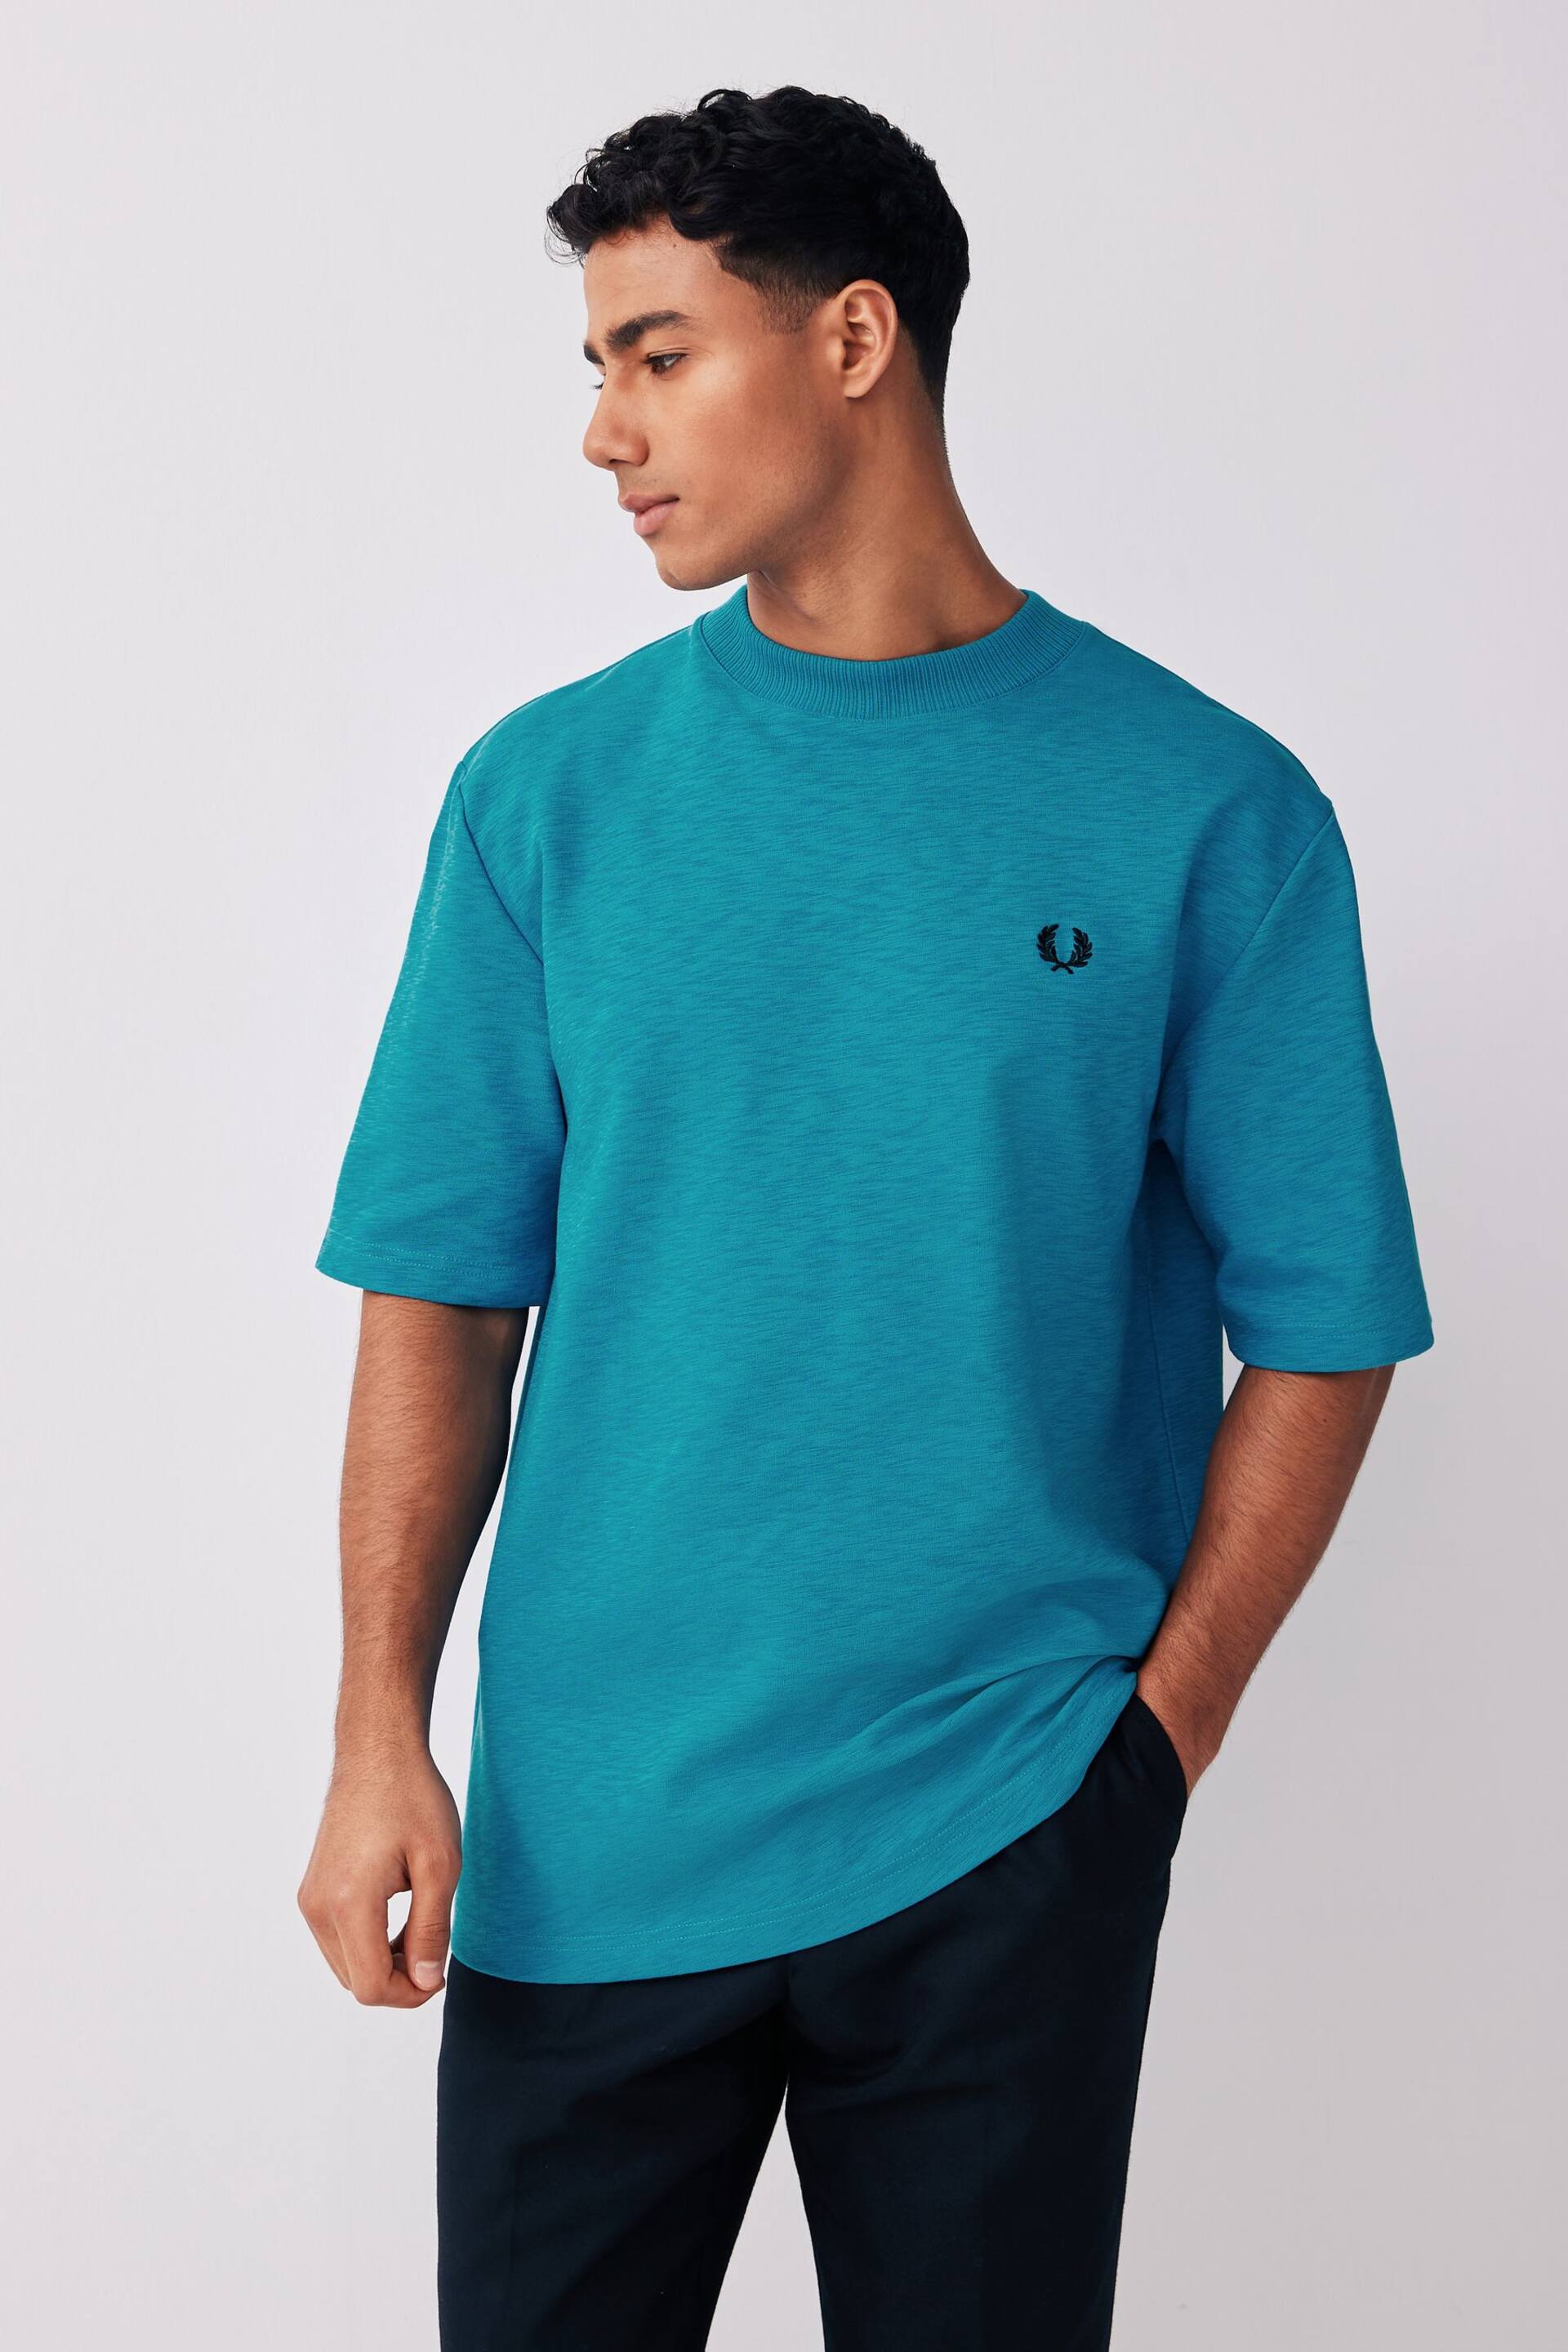 Fred Perry Relaxed Fit Slub Textured T-Shirt - Image 3 of 4